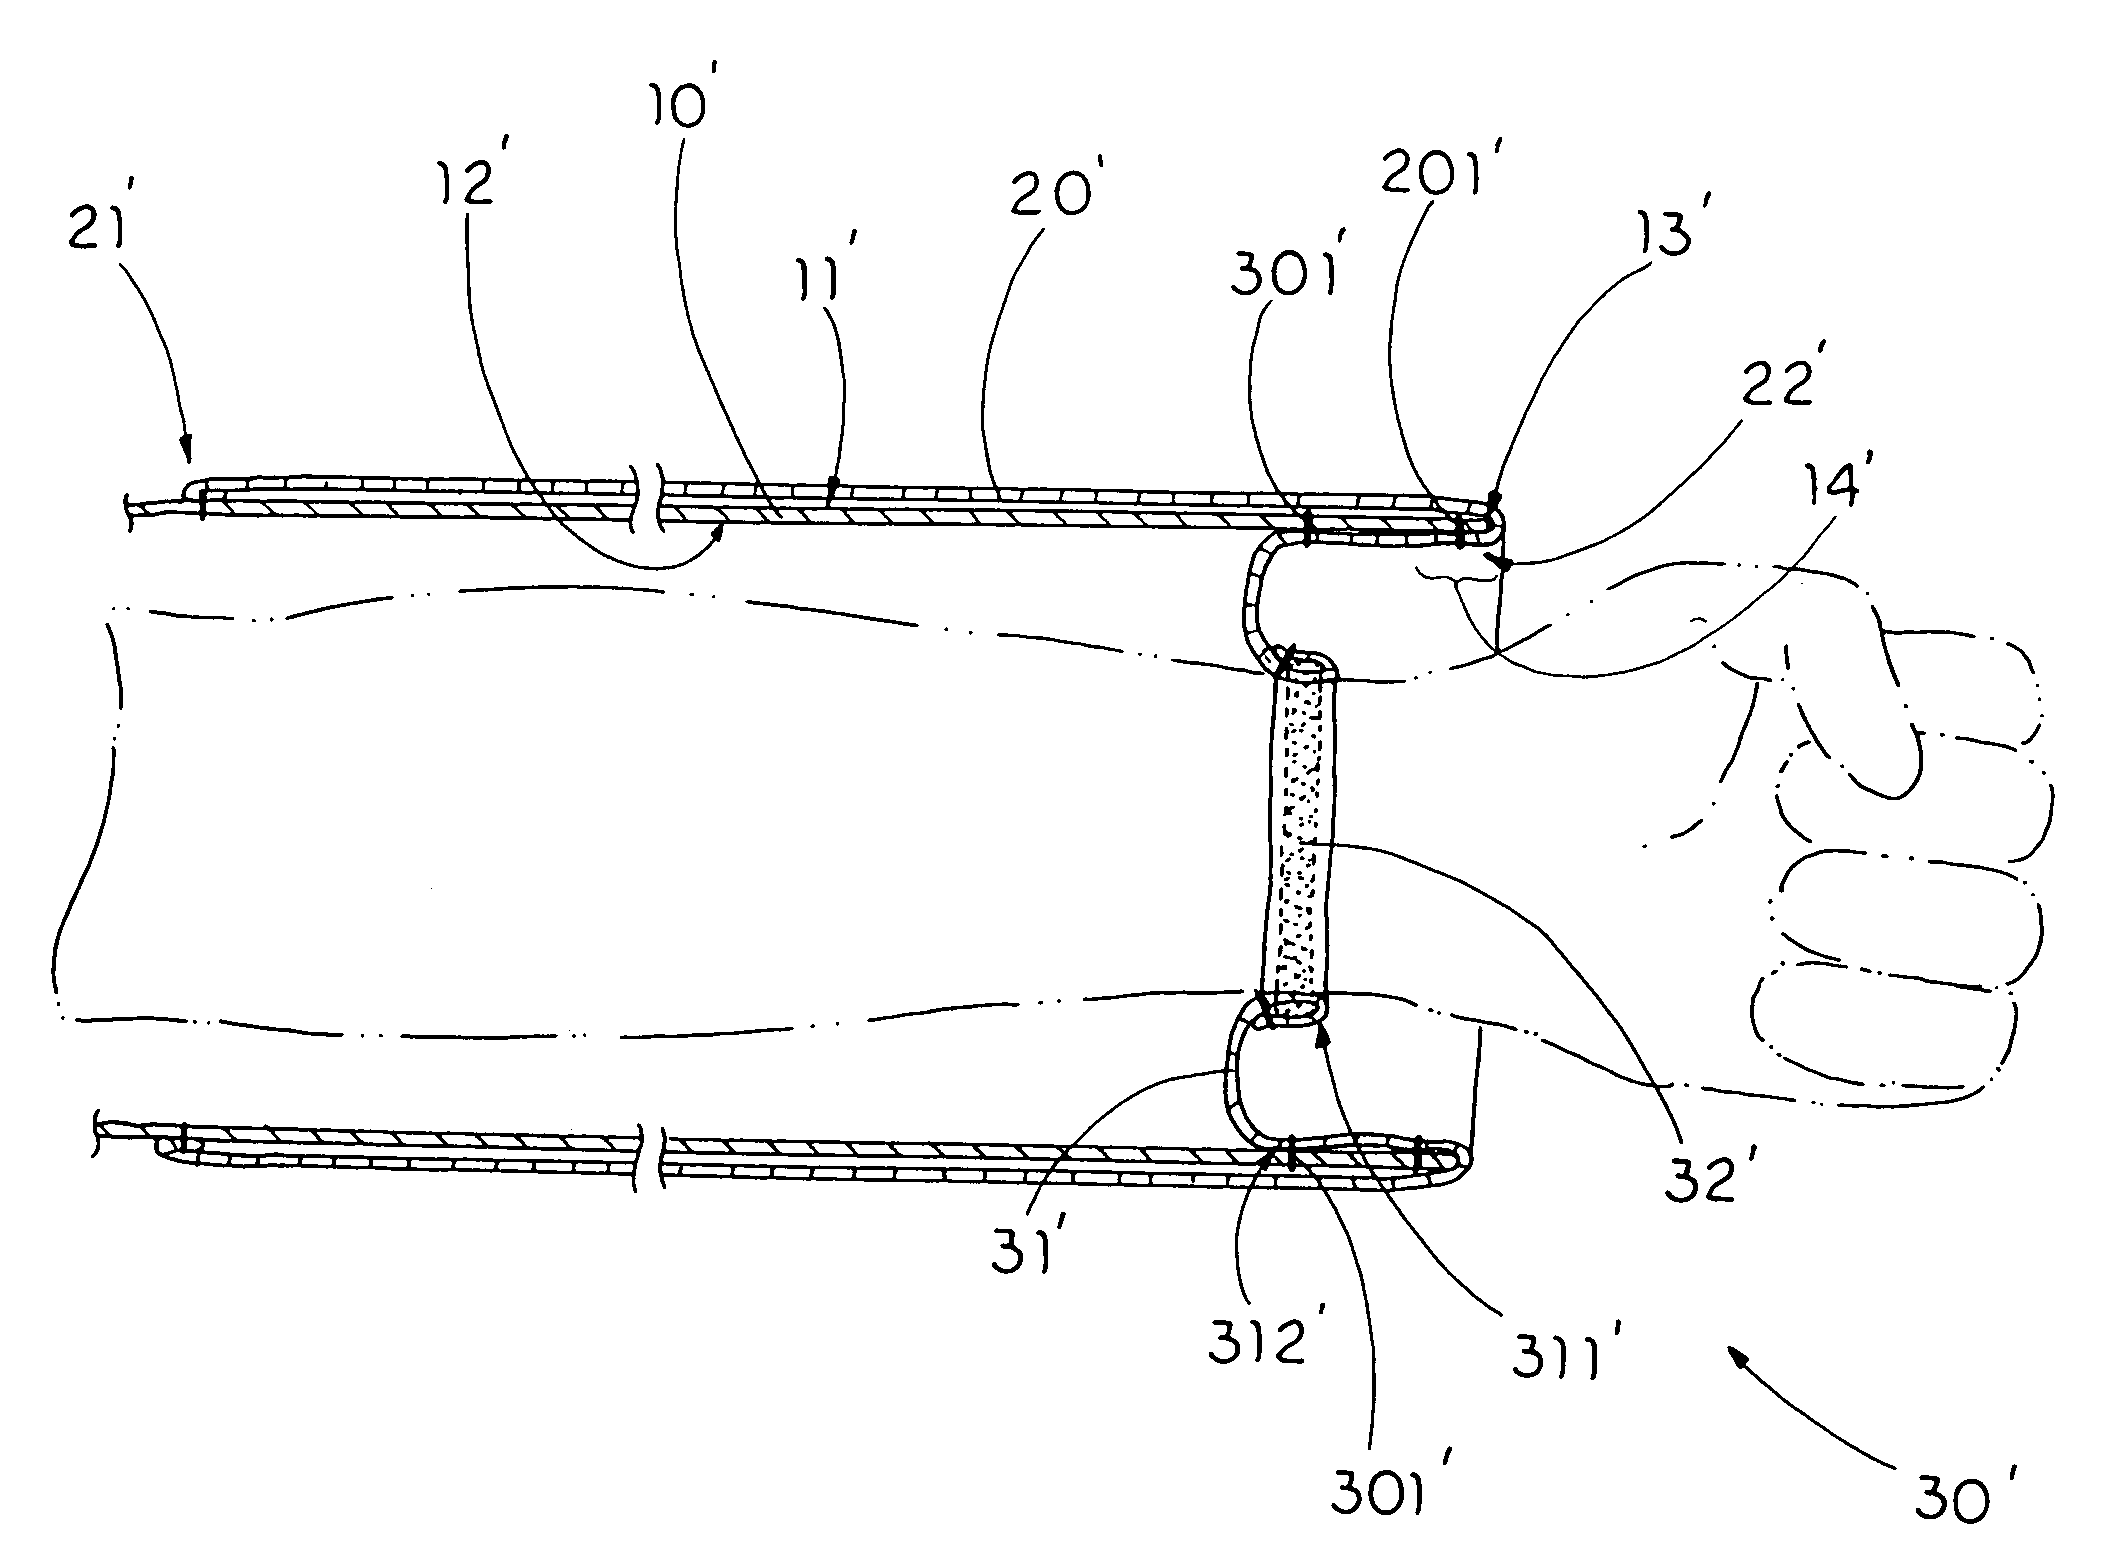 Sanitary arm sleeve structure